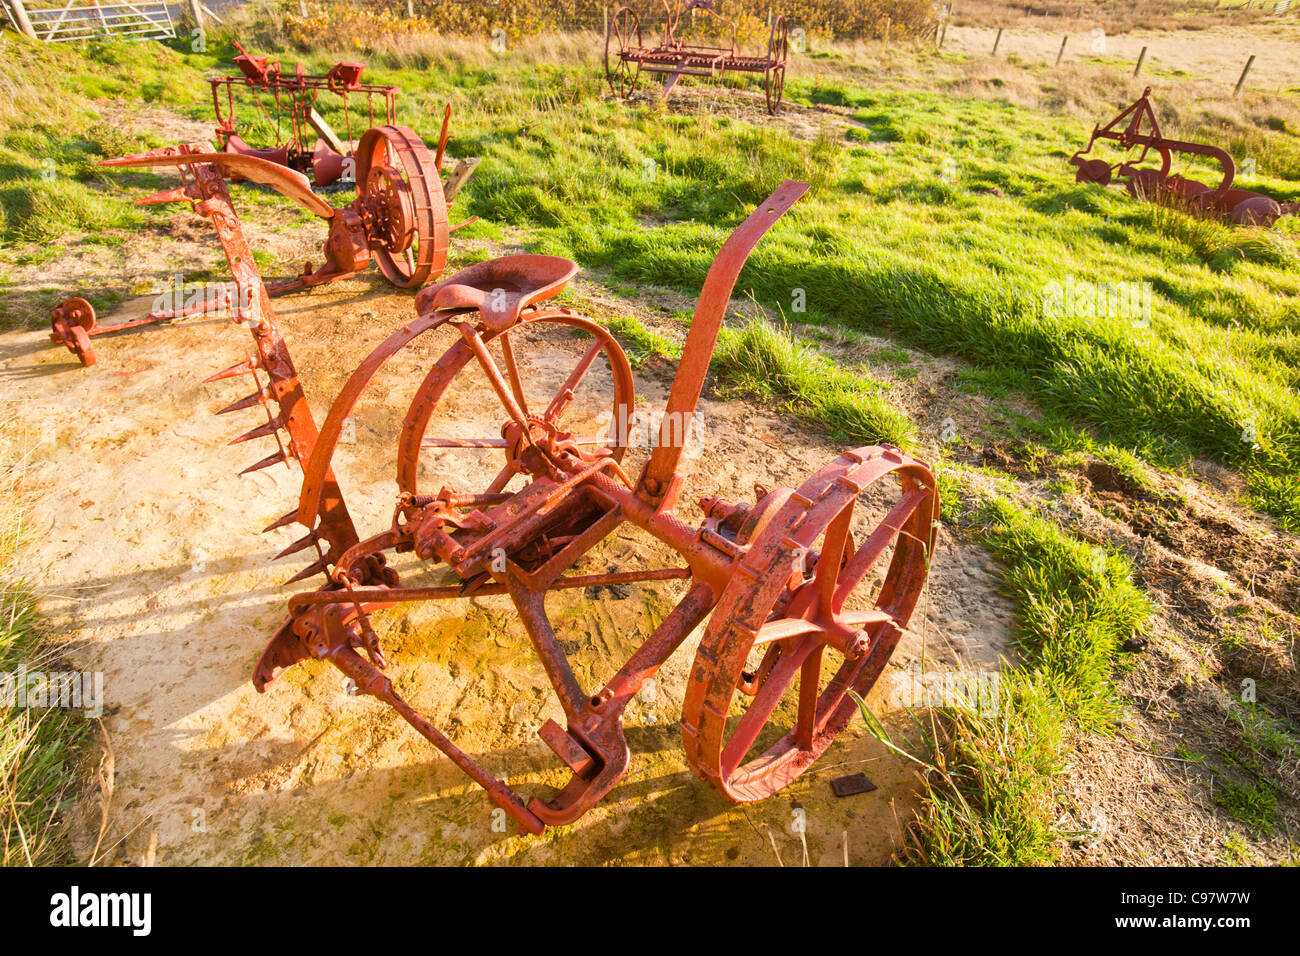 Old farming implements at Rackwick on the isle of hoy, Orkney, Scotland, UK. Stock Photo